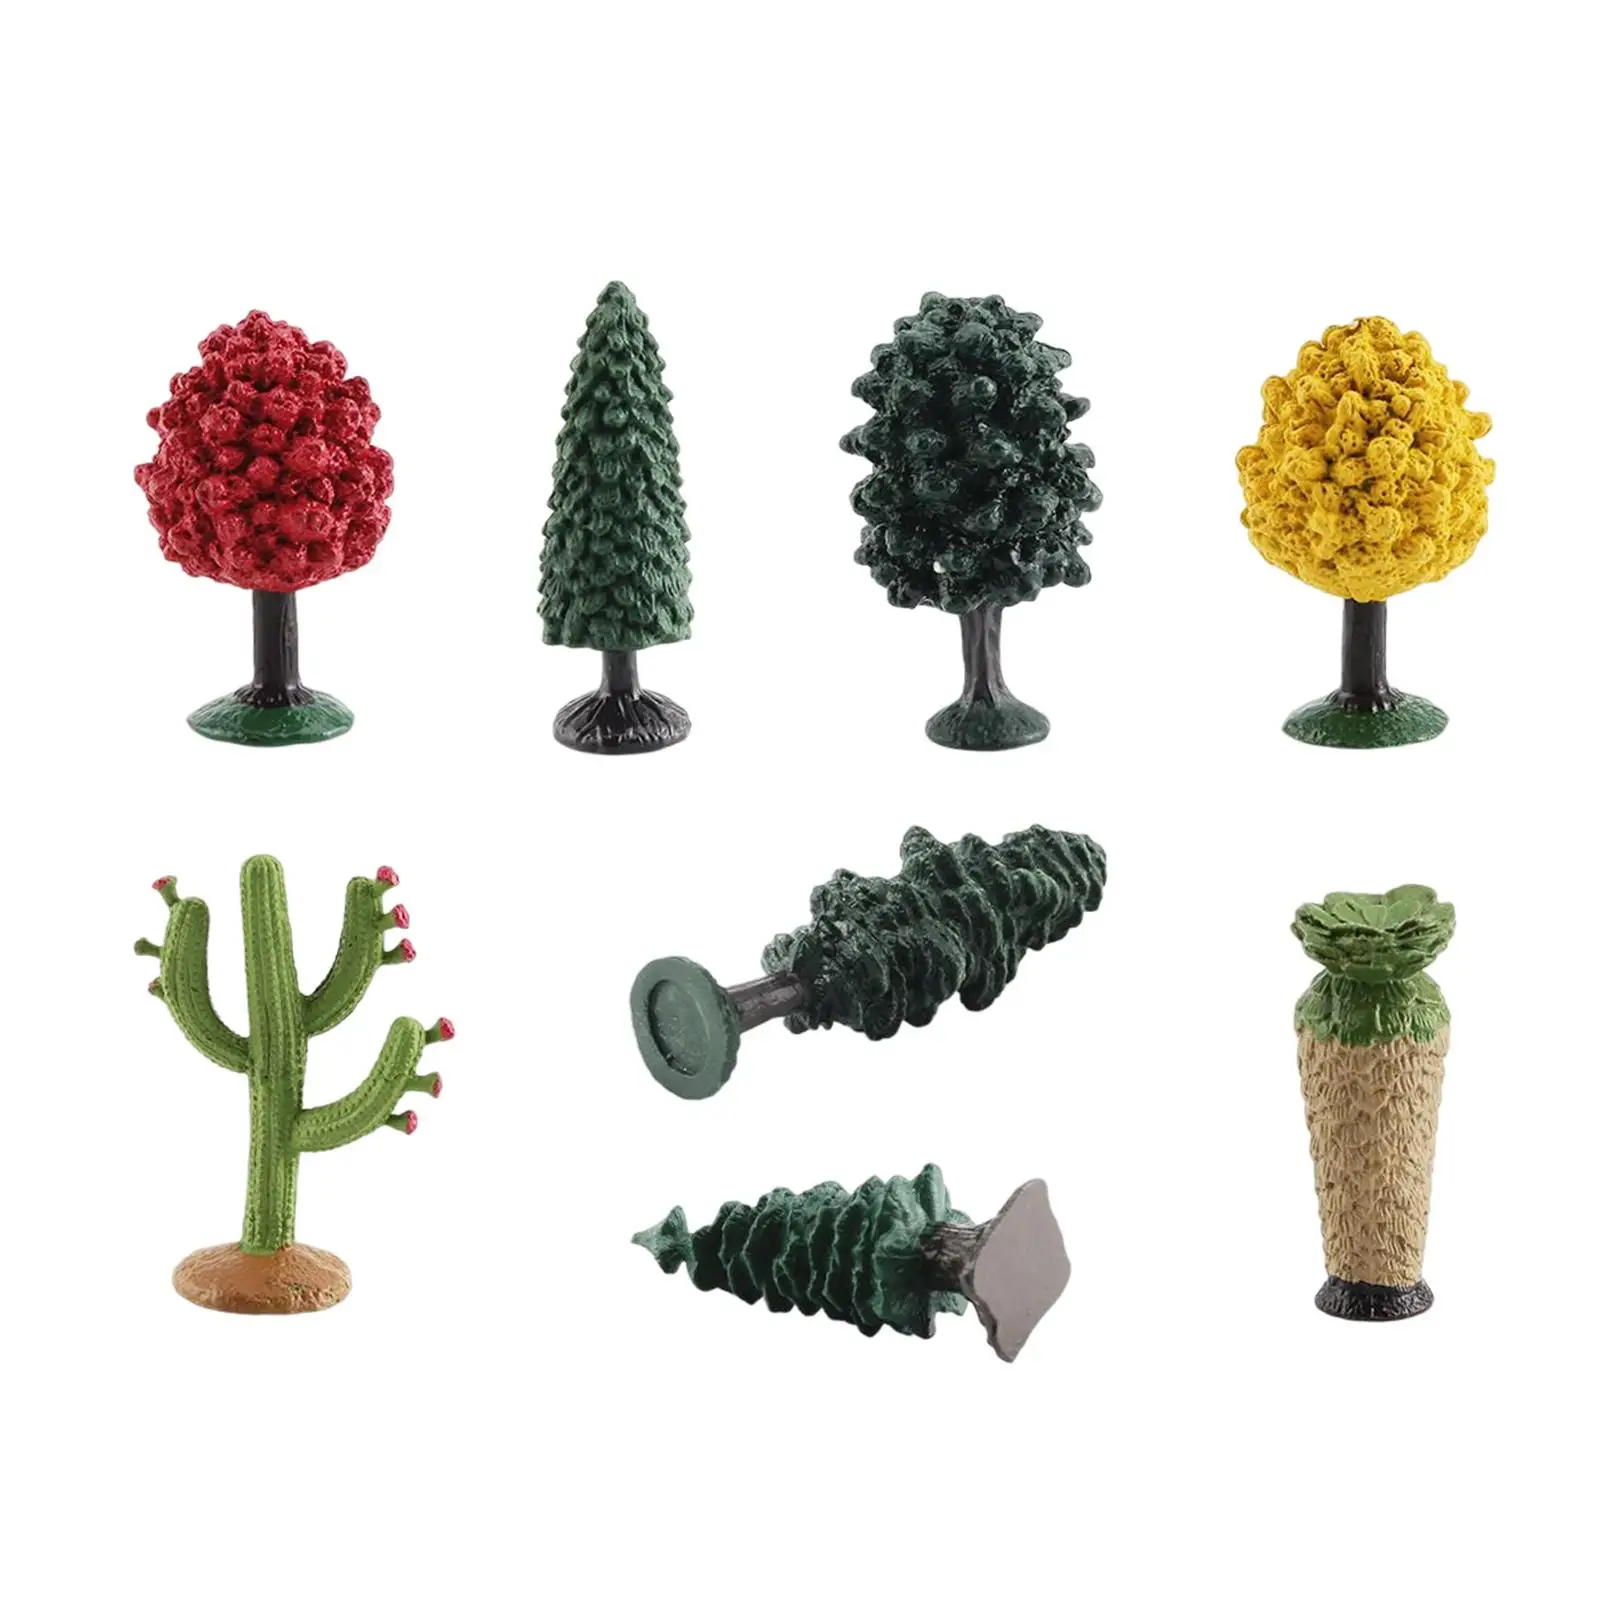 8 Pieces Miniature Trees Model Sculpture for Micro Landscape Sand Table Toddlers Unisex